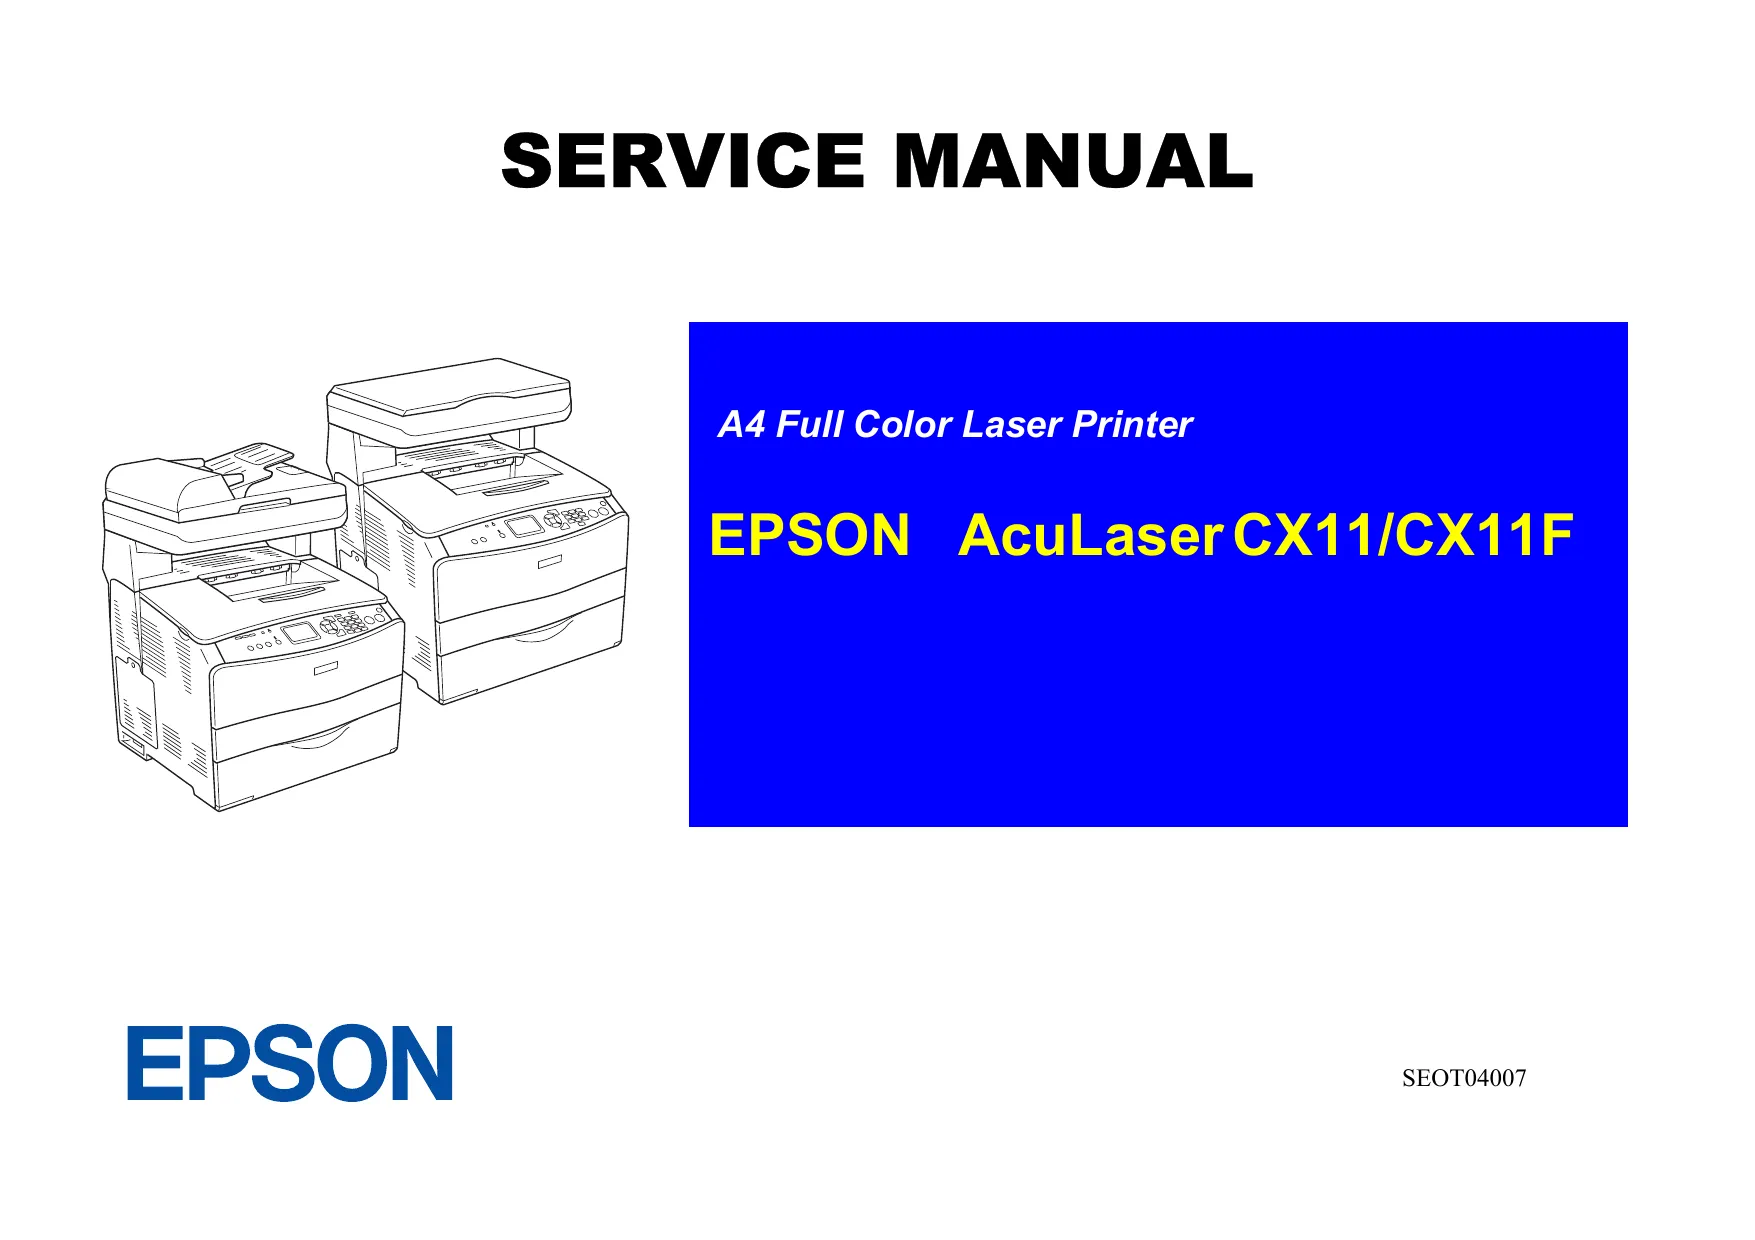 Epson Aculaser CX11 + CX11F multifunction laser printer service guide Preview image 1